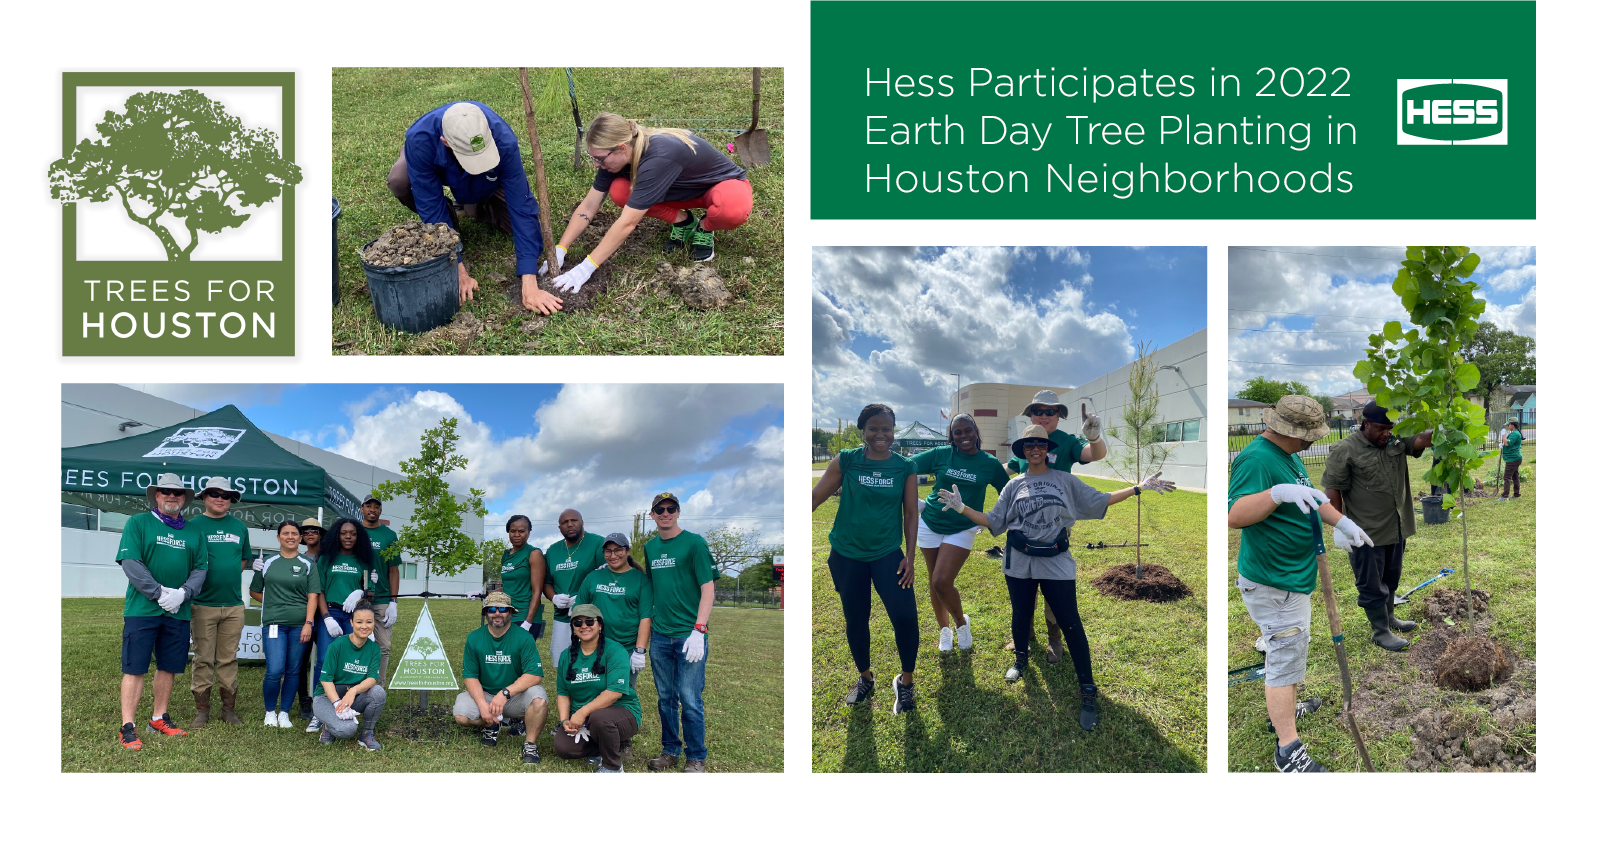 Hess Participates in Earth Day Tree Planting Event in Houston